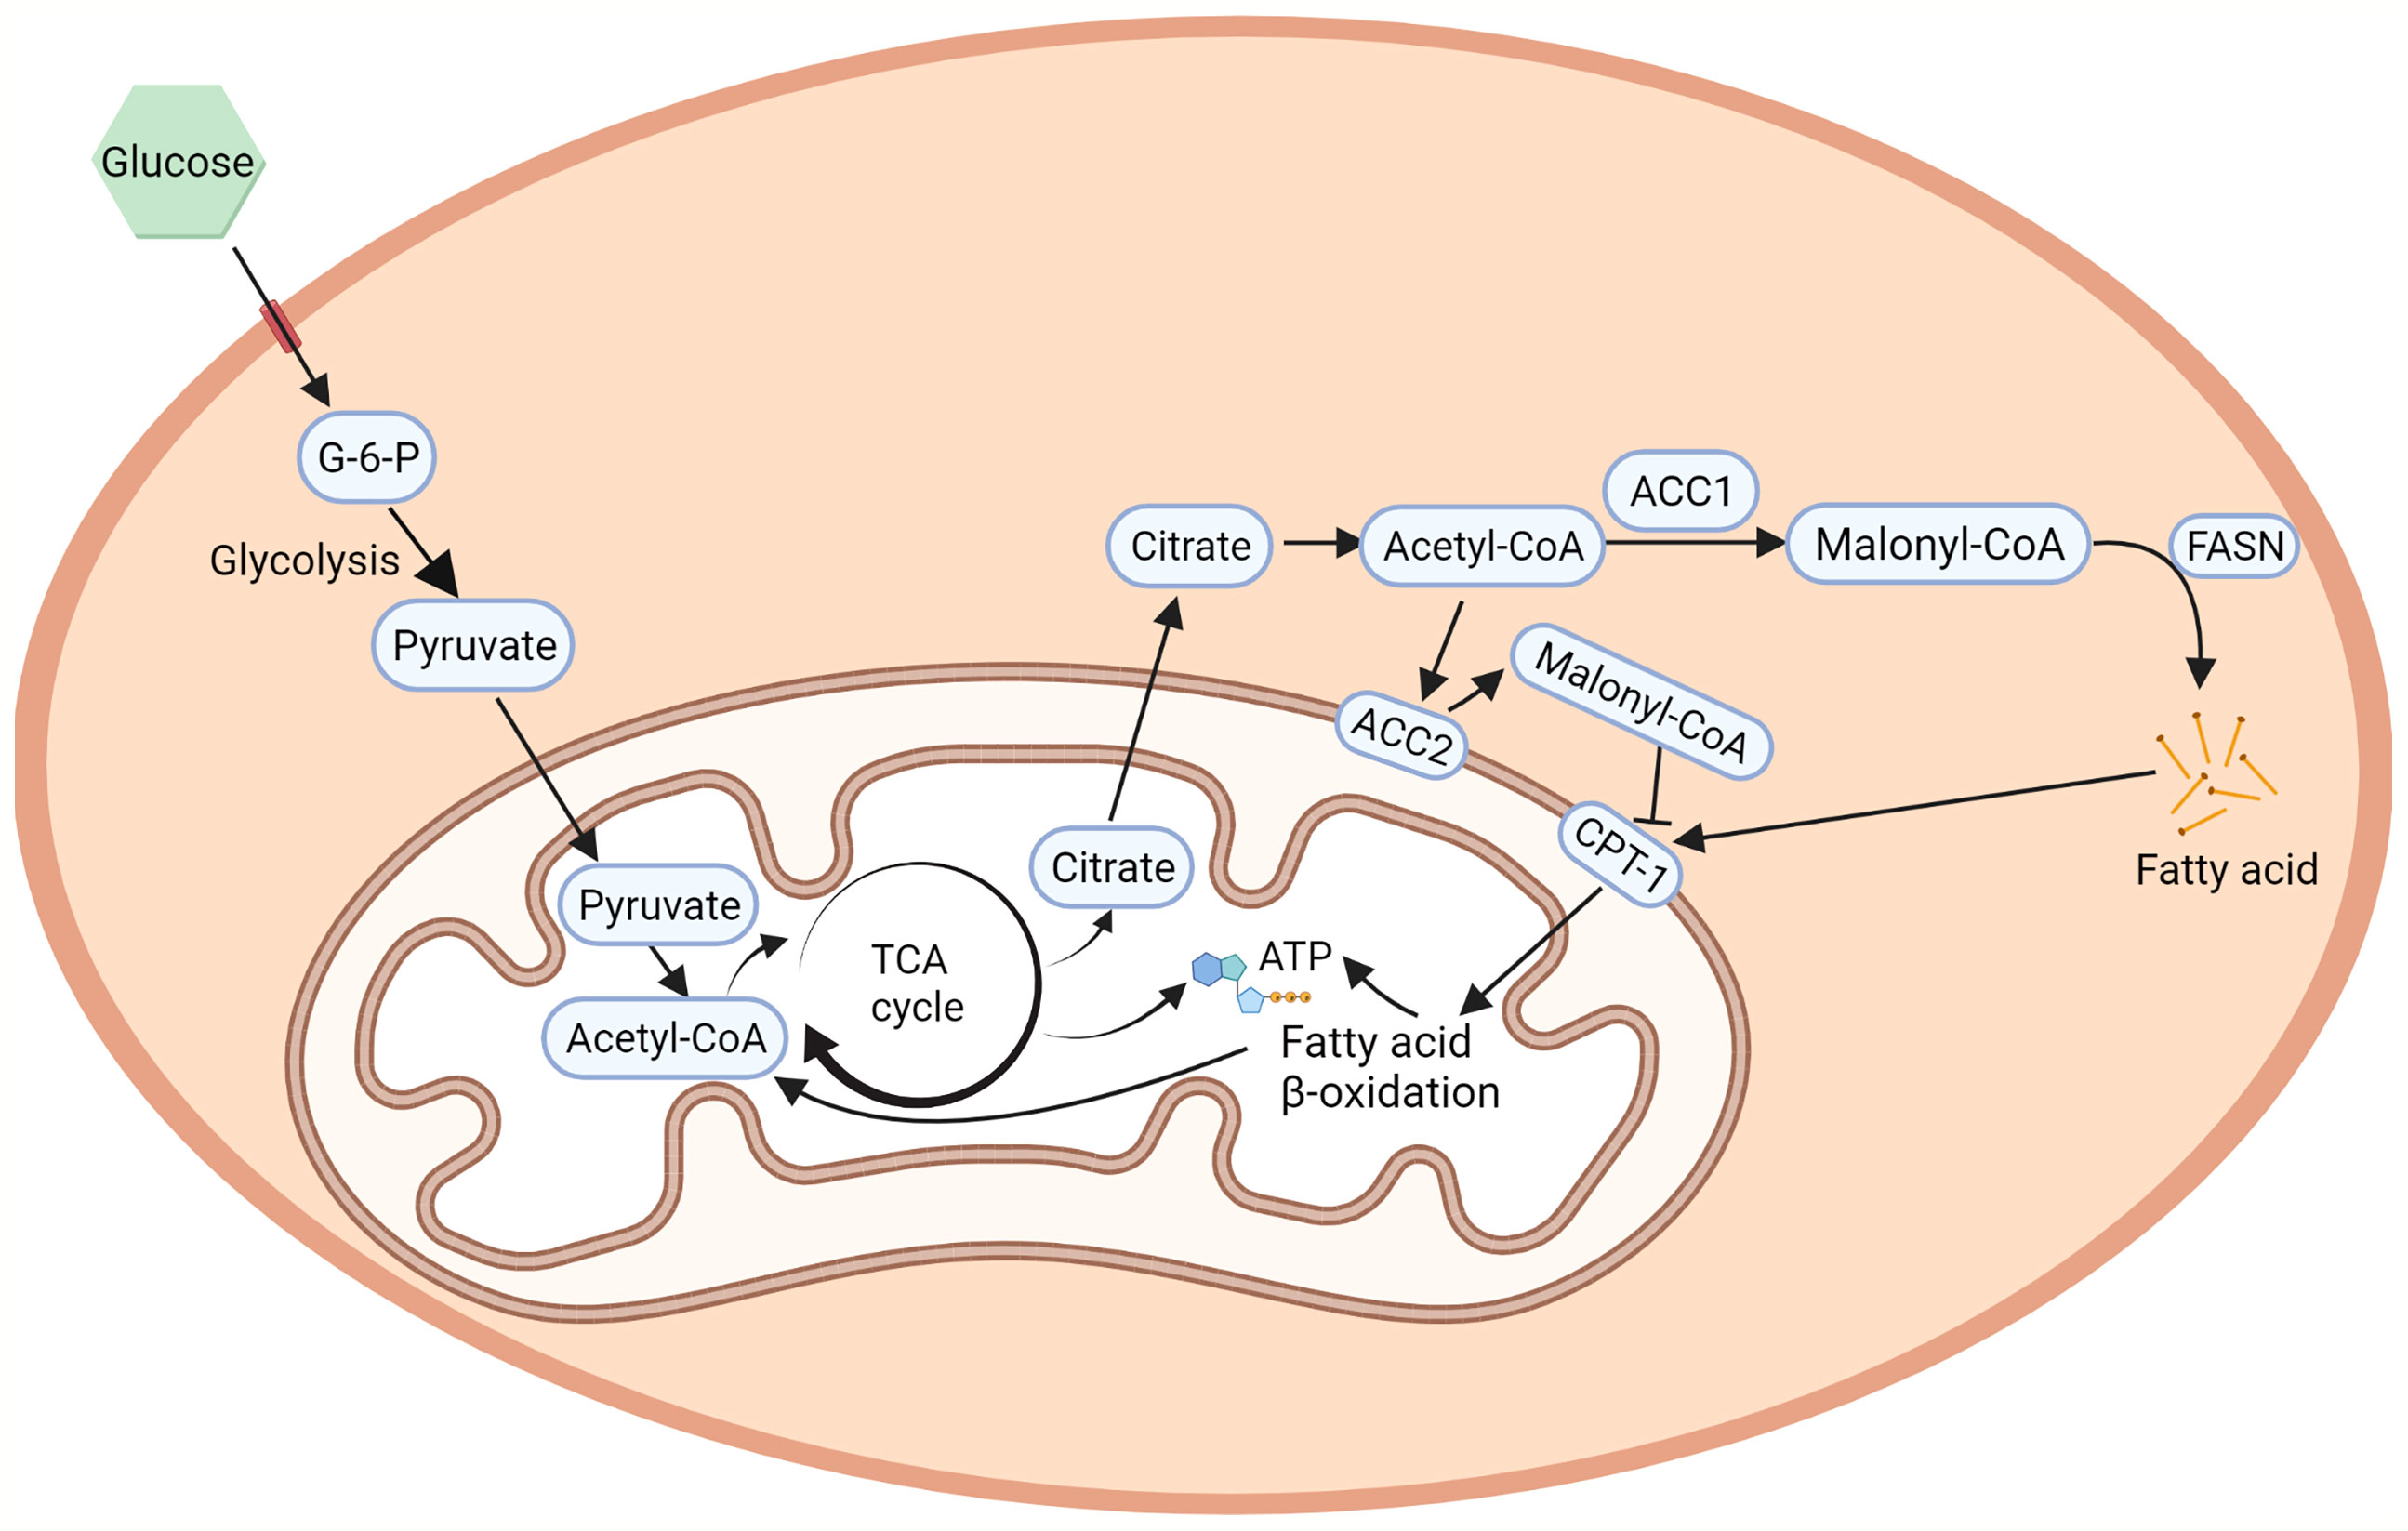 acetyl coa carboxylase pathway